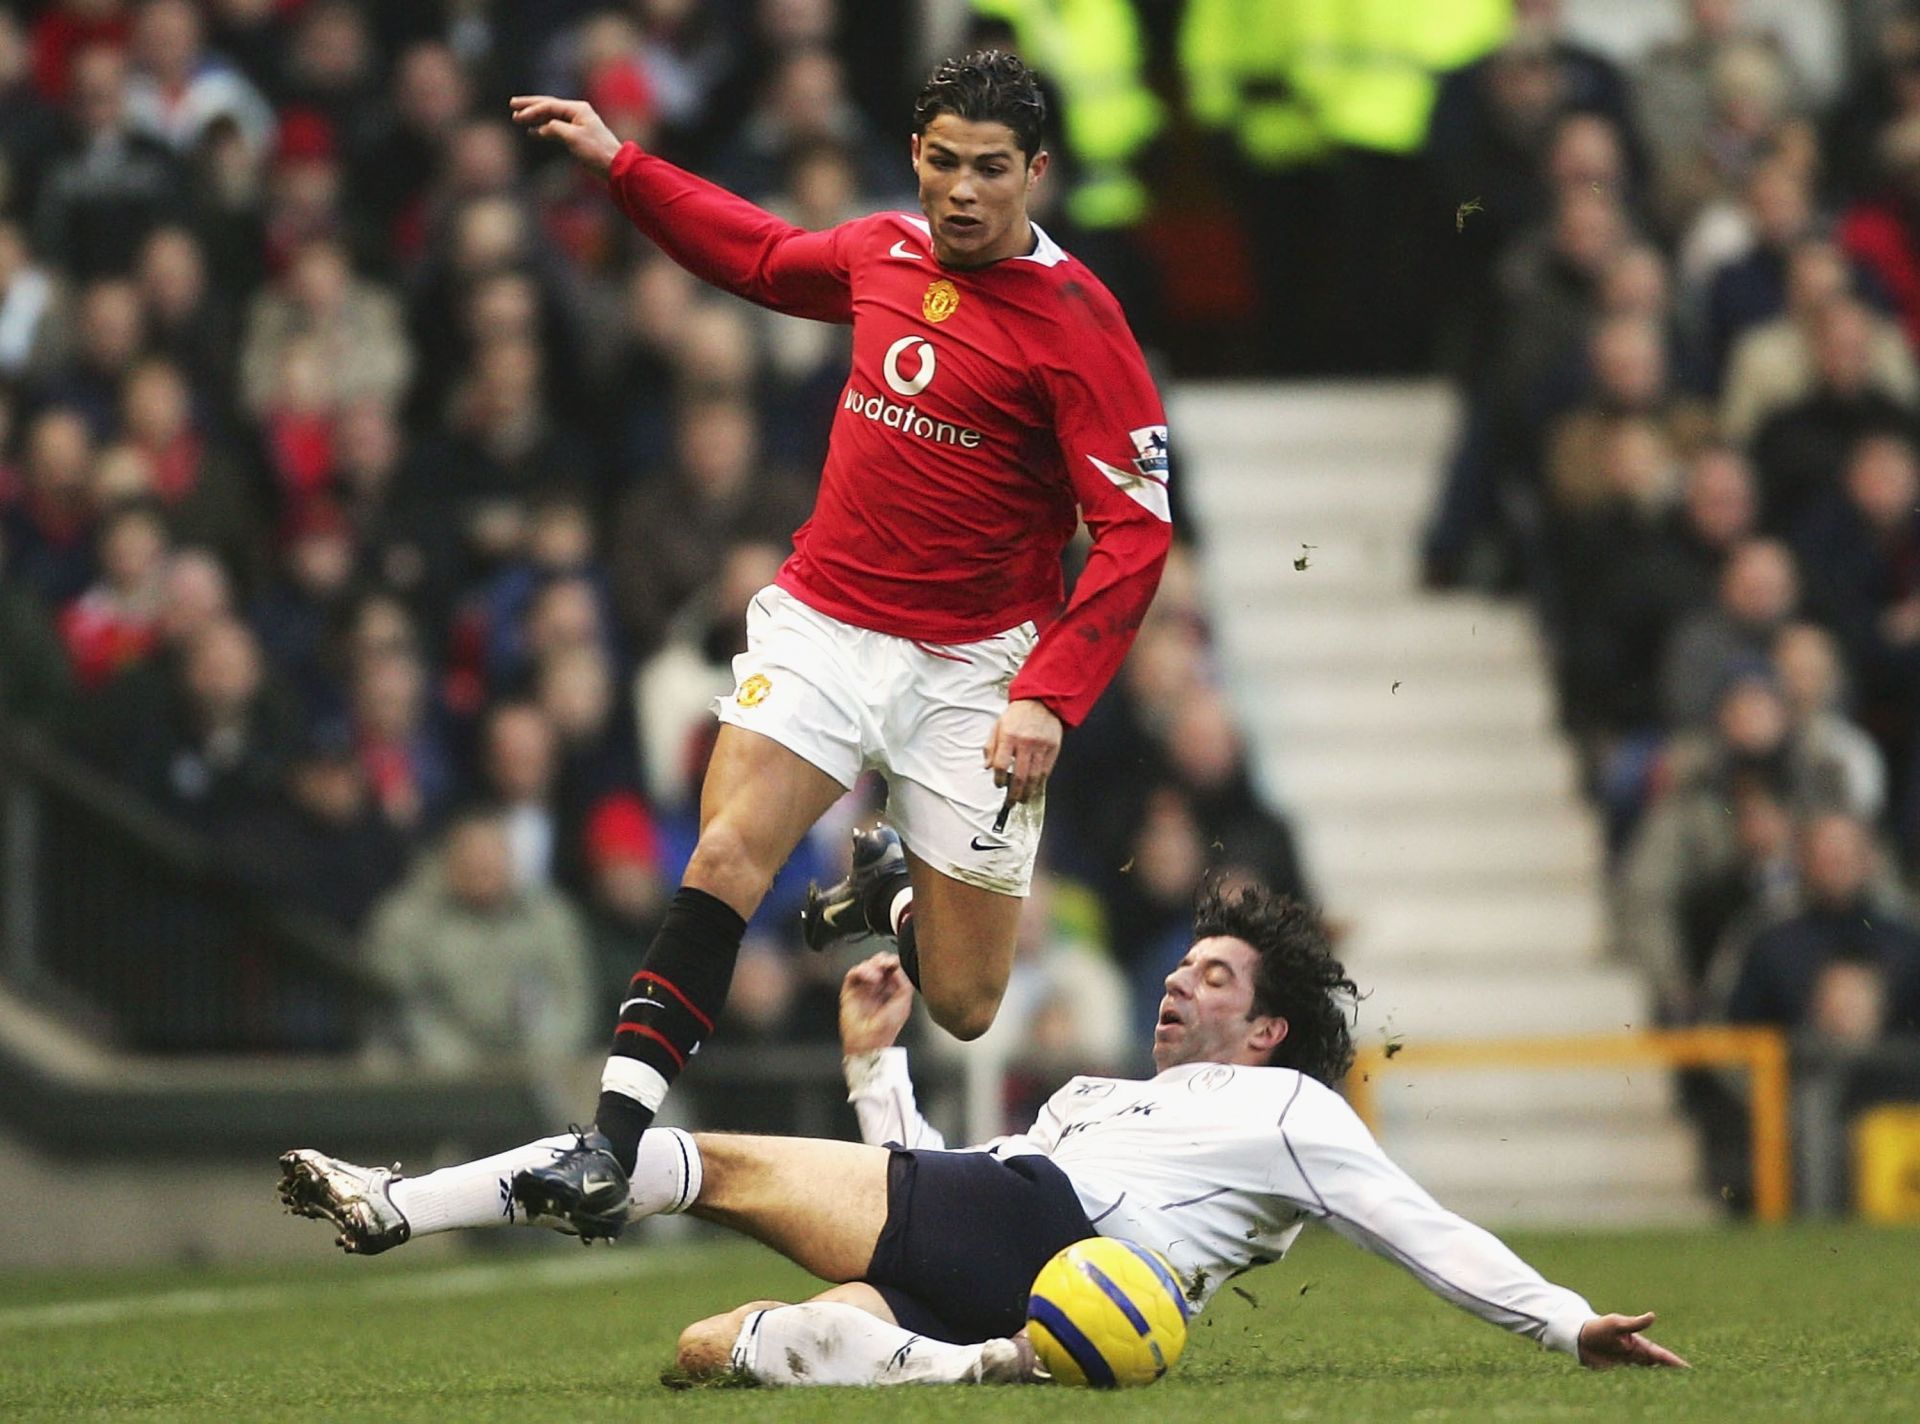 Back in 2004 Ronaldo was still getting used to intensity of the iconic Premier League